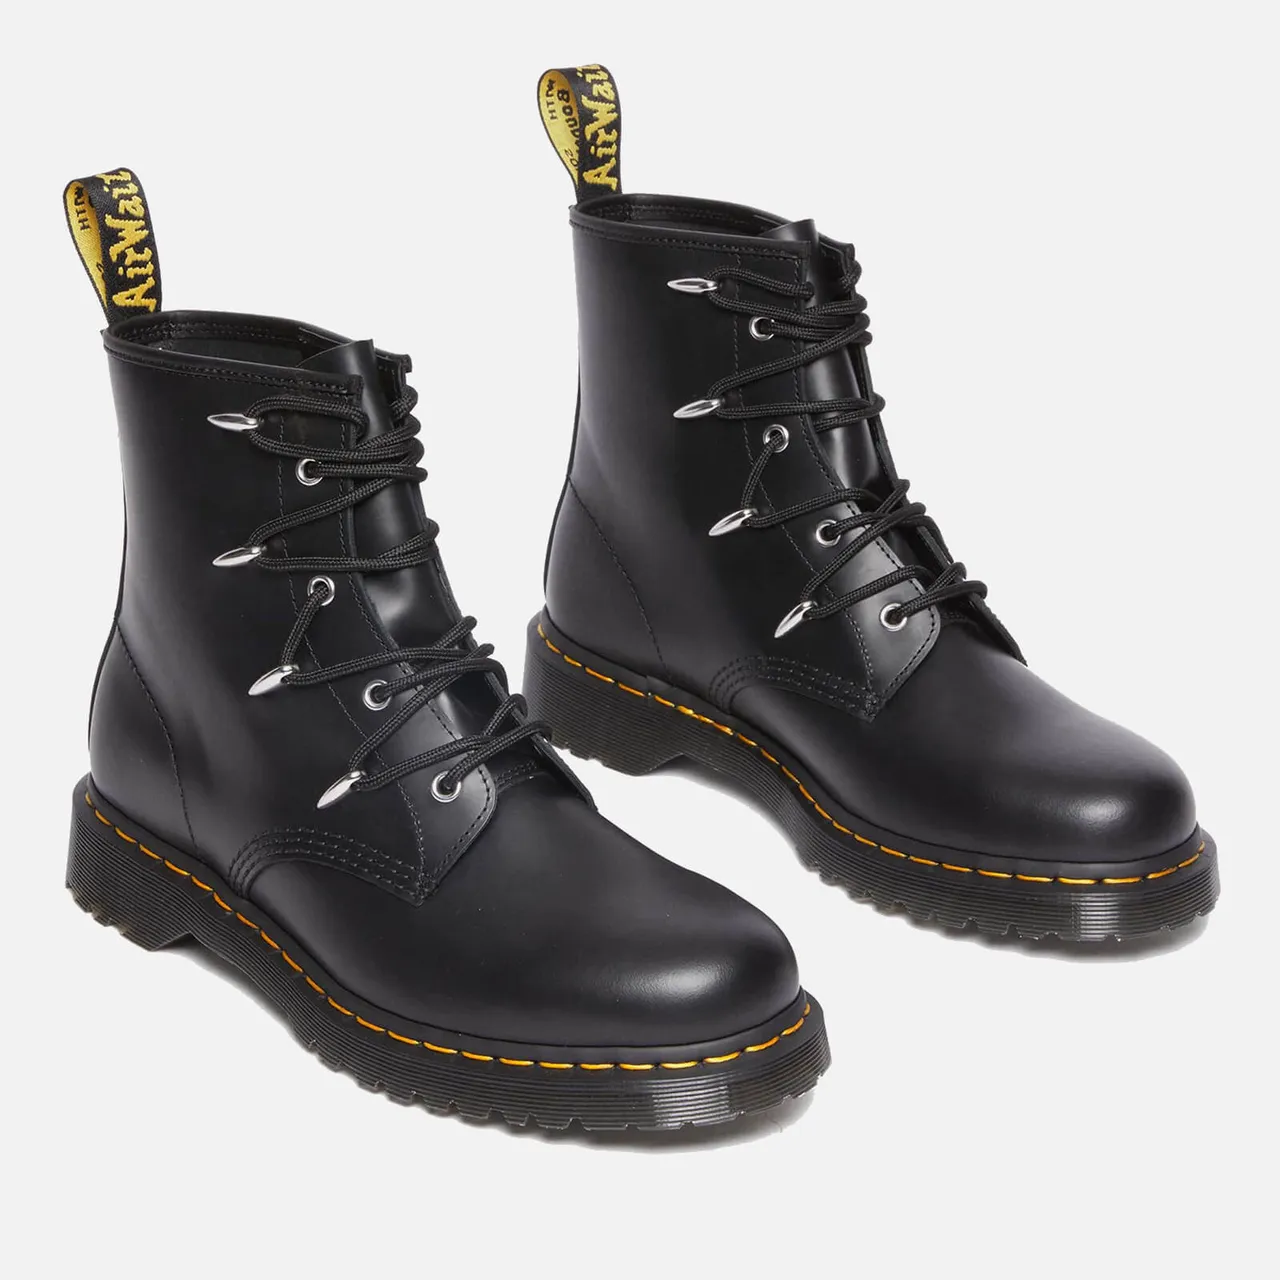 Dr. Martens Women's 1460 Leather 8-Eye Boots - UK